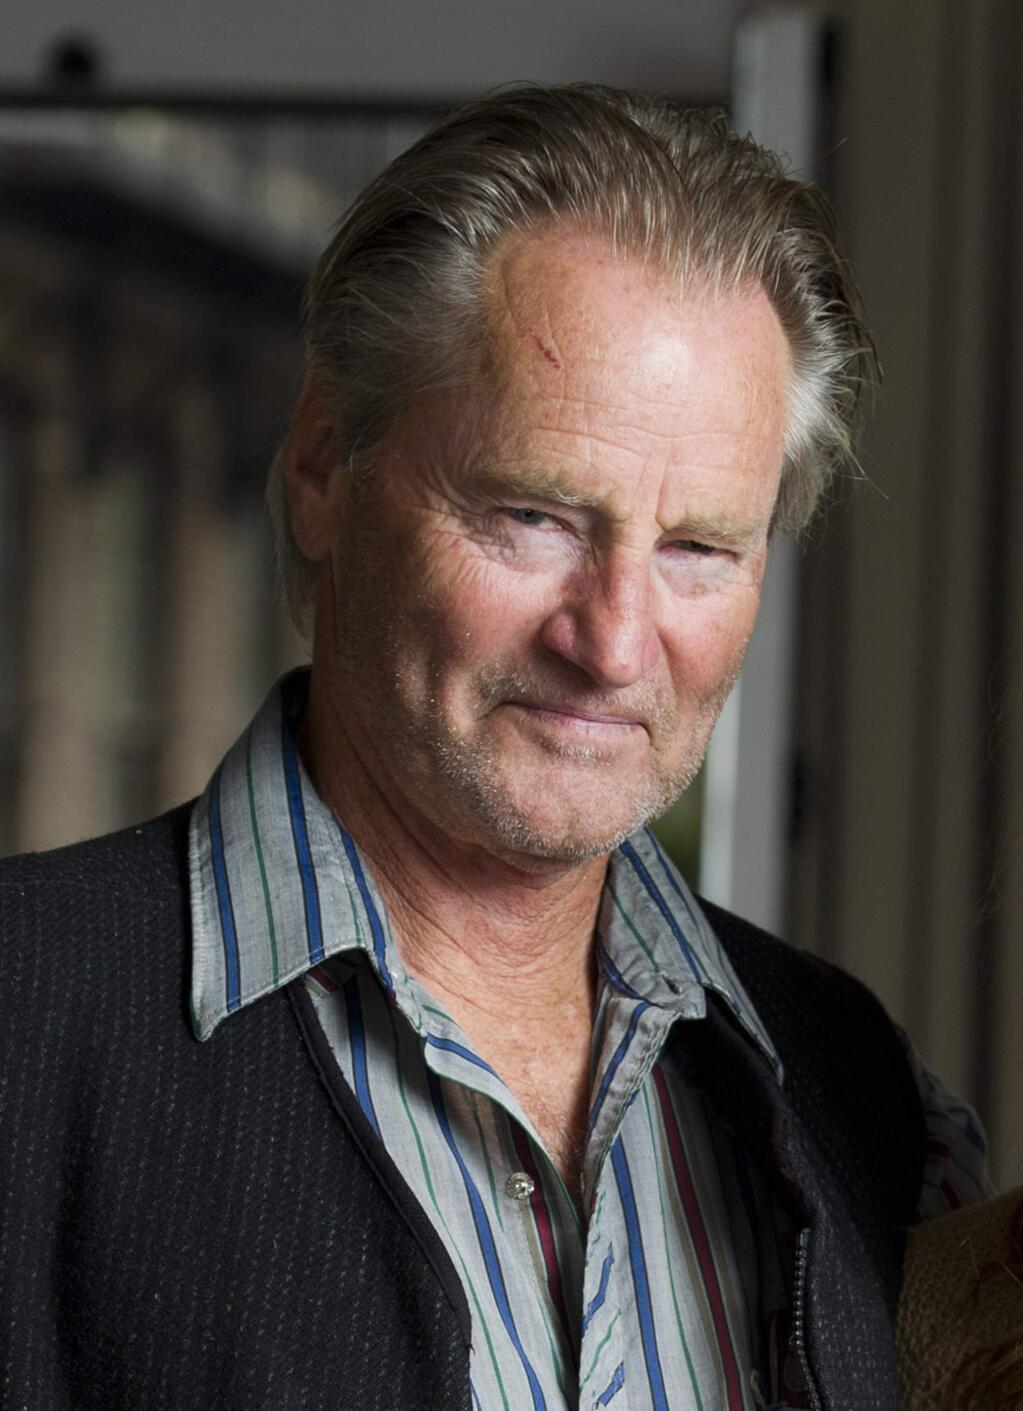 FILE - In this Sept. 29, 2011 file photo, actor Sam Shepard poses for a portrait in New York. Shepard, the Pulitzer Prize-winning playwright and Oscar-nominated actor, died of complications from ALS, Thursday, July 27, 2017, at his home in Kentucky. He was 73. (AP Photo/Charles Sykes, FIle)